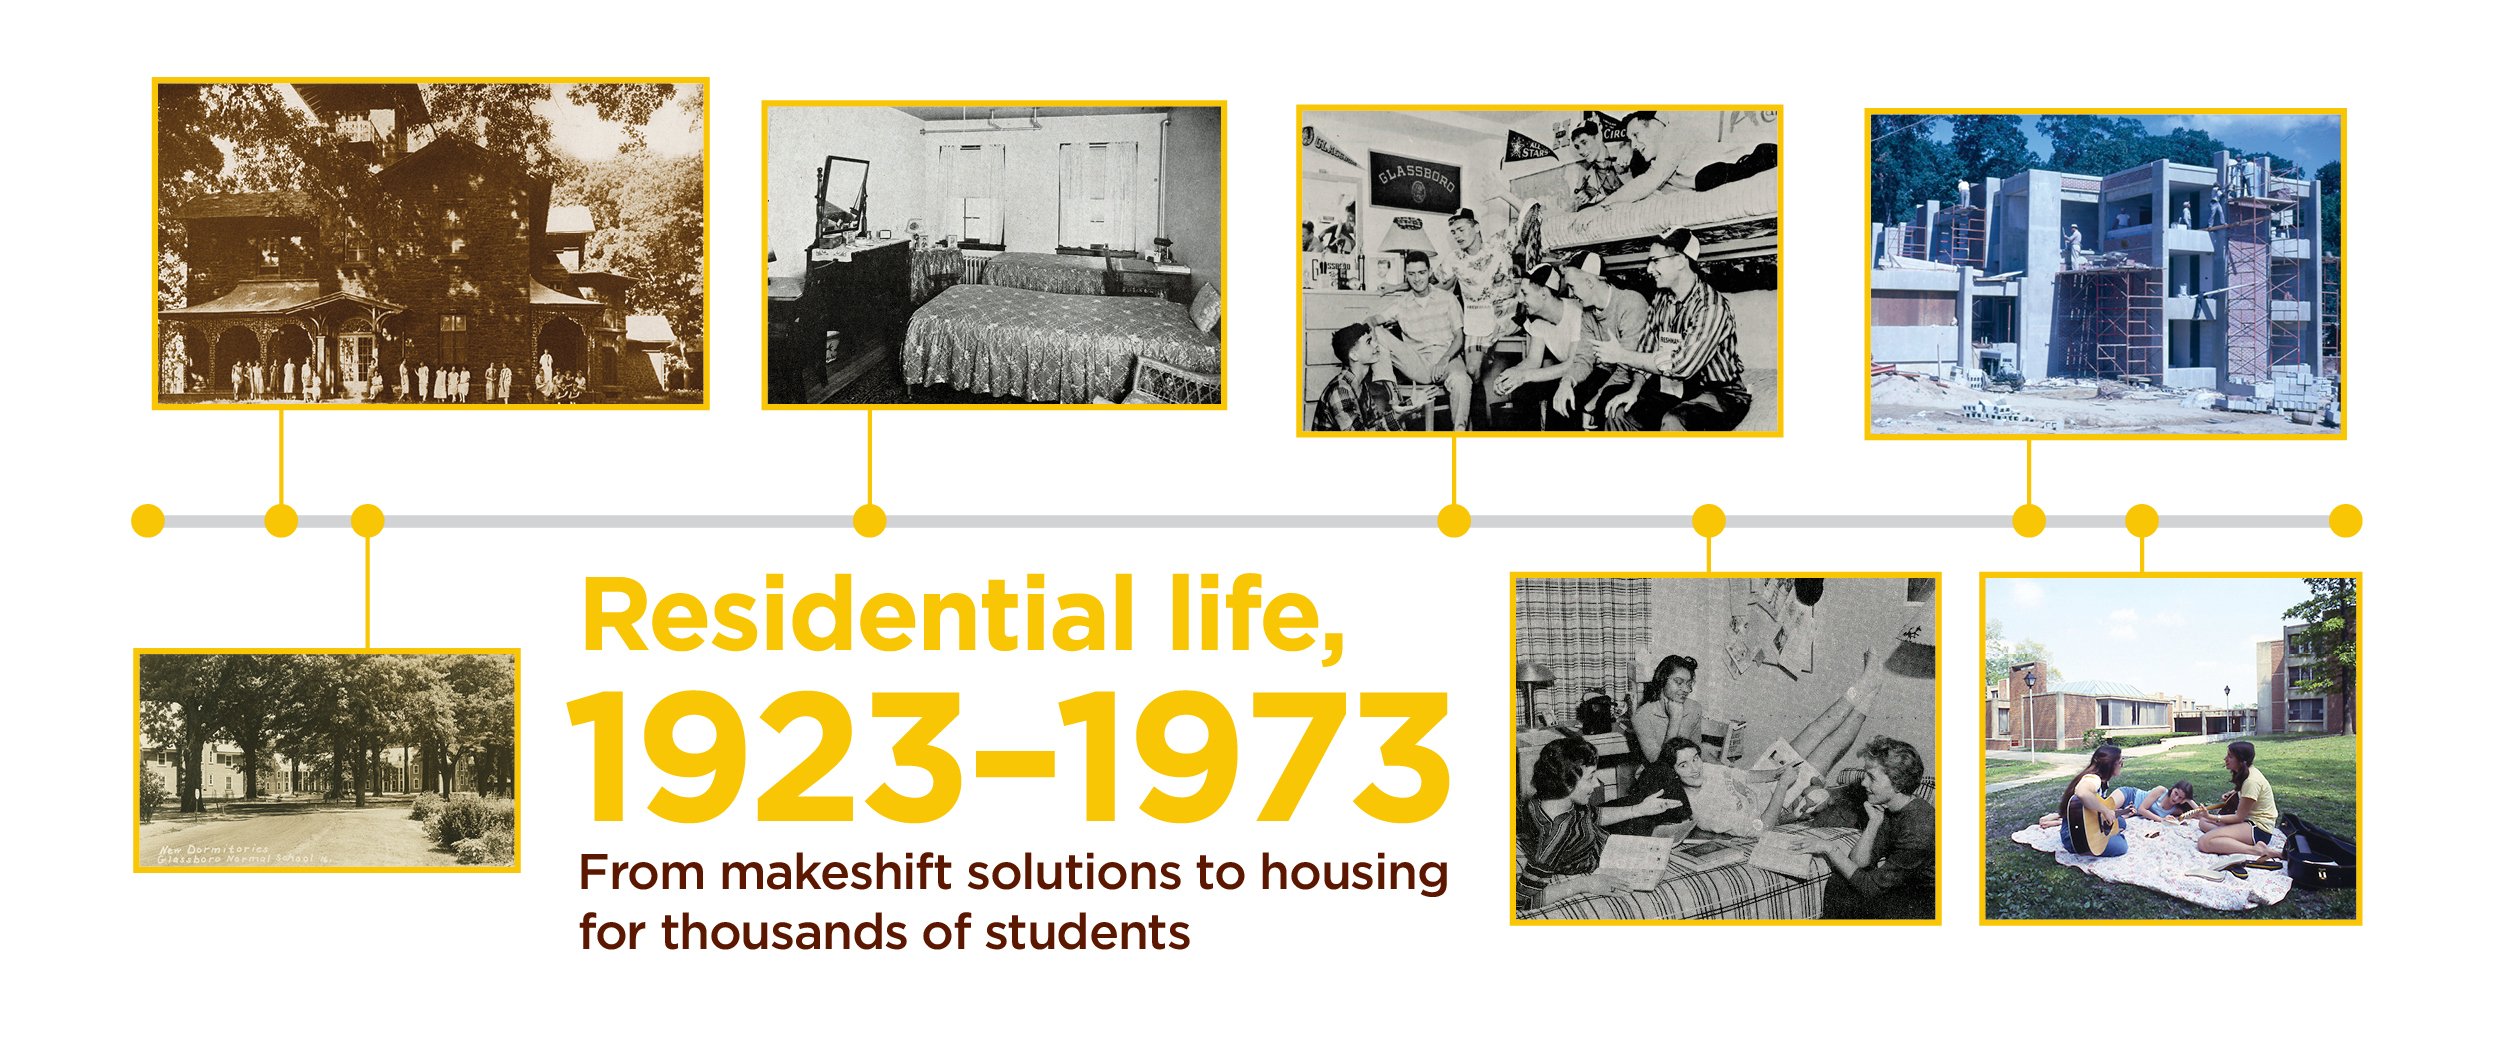 Residential life, 1923-1973: From makeshift solutions to housing for thousands of students